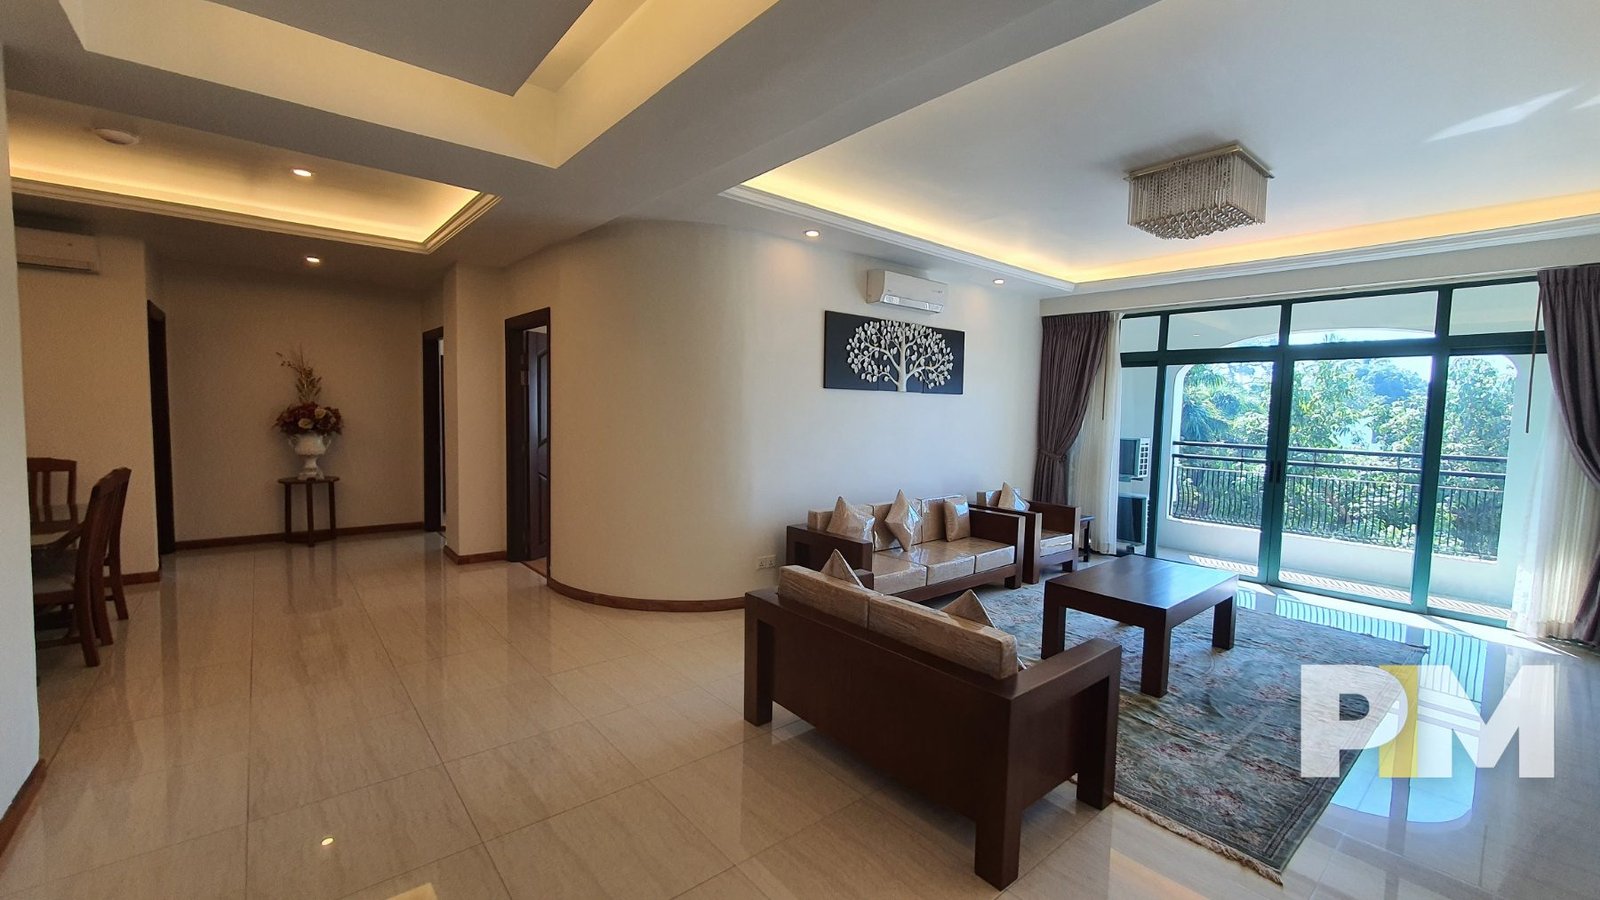 3 bed condo rent in kamayut